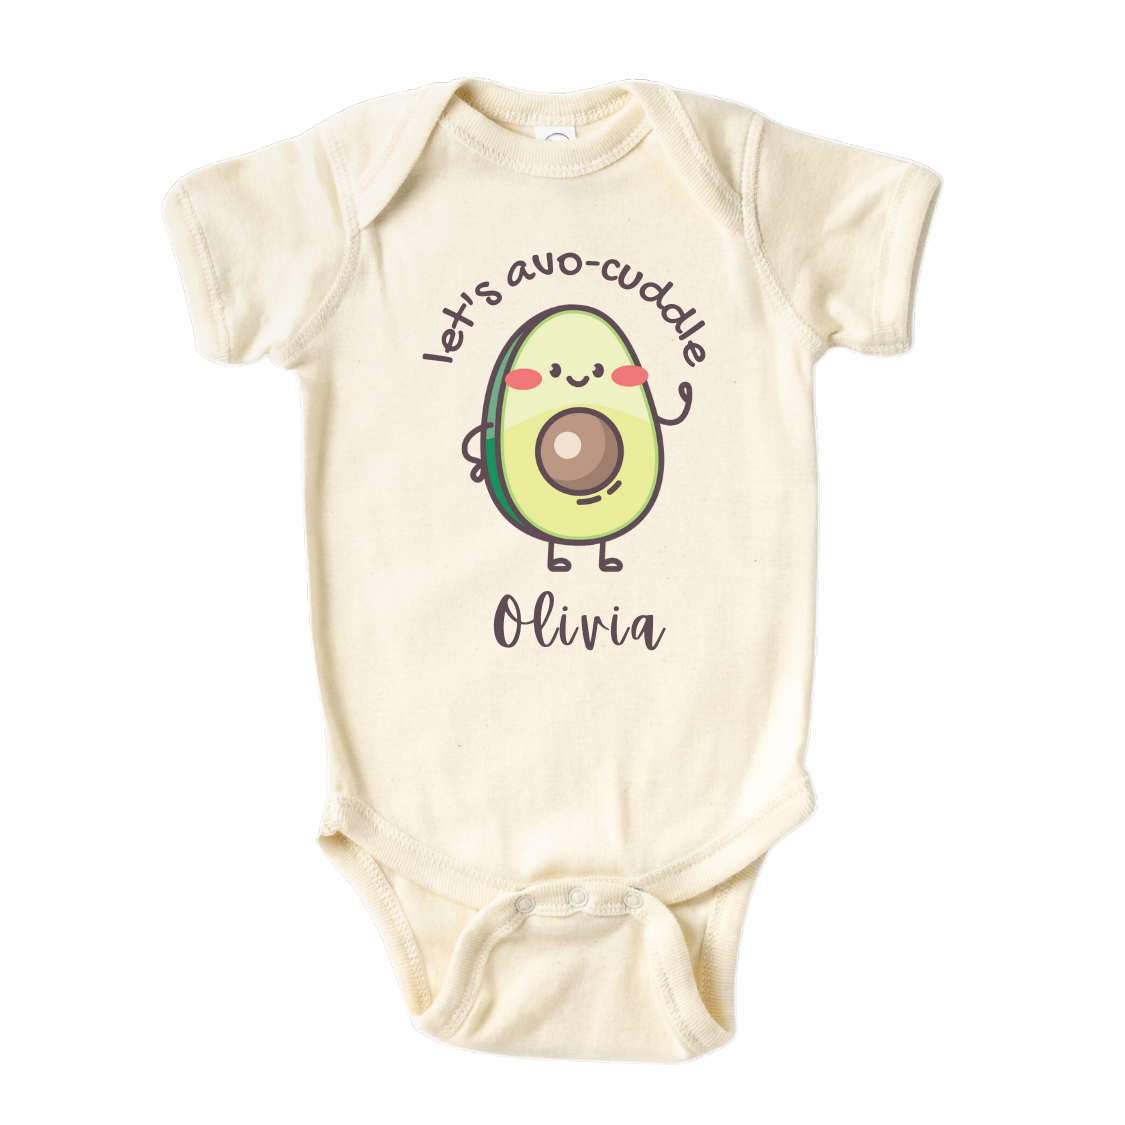 A cute avocado design with the text 'Let's Avocuddle' on a kids' t-shirt and baby onesie. The design can be personalized with customizable names for added charm and sweetness